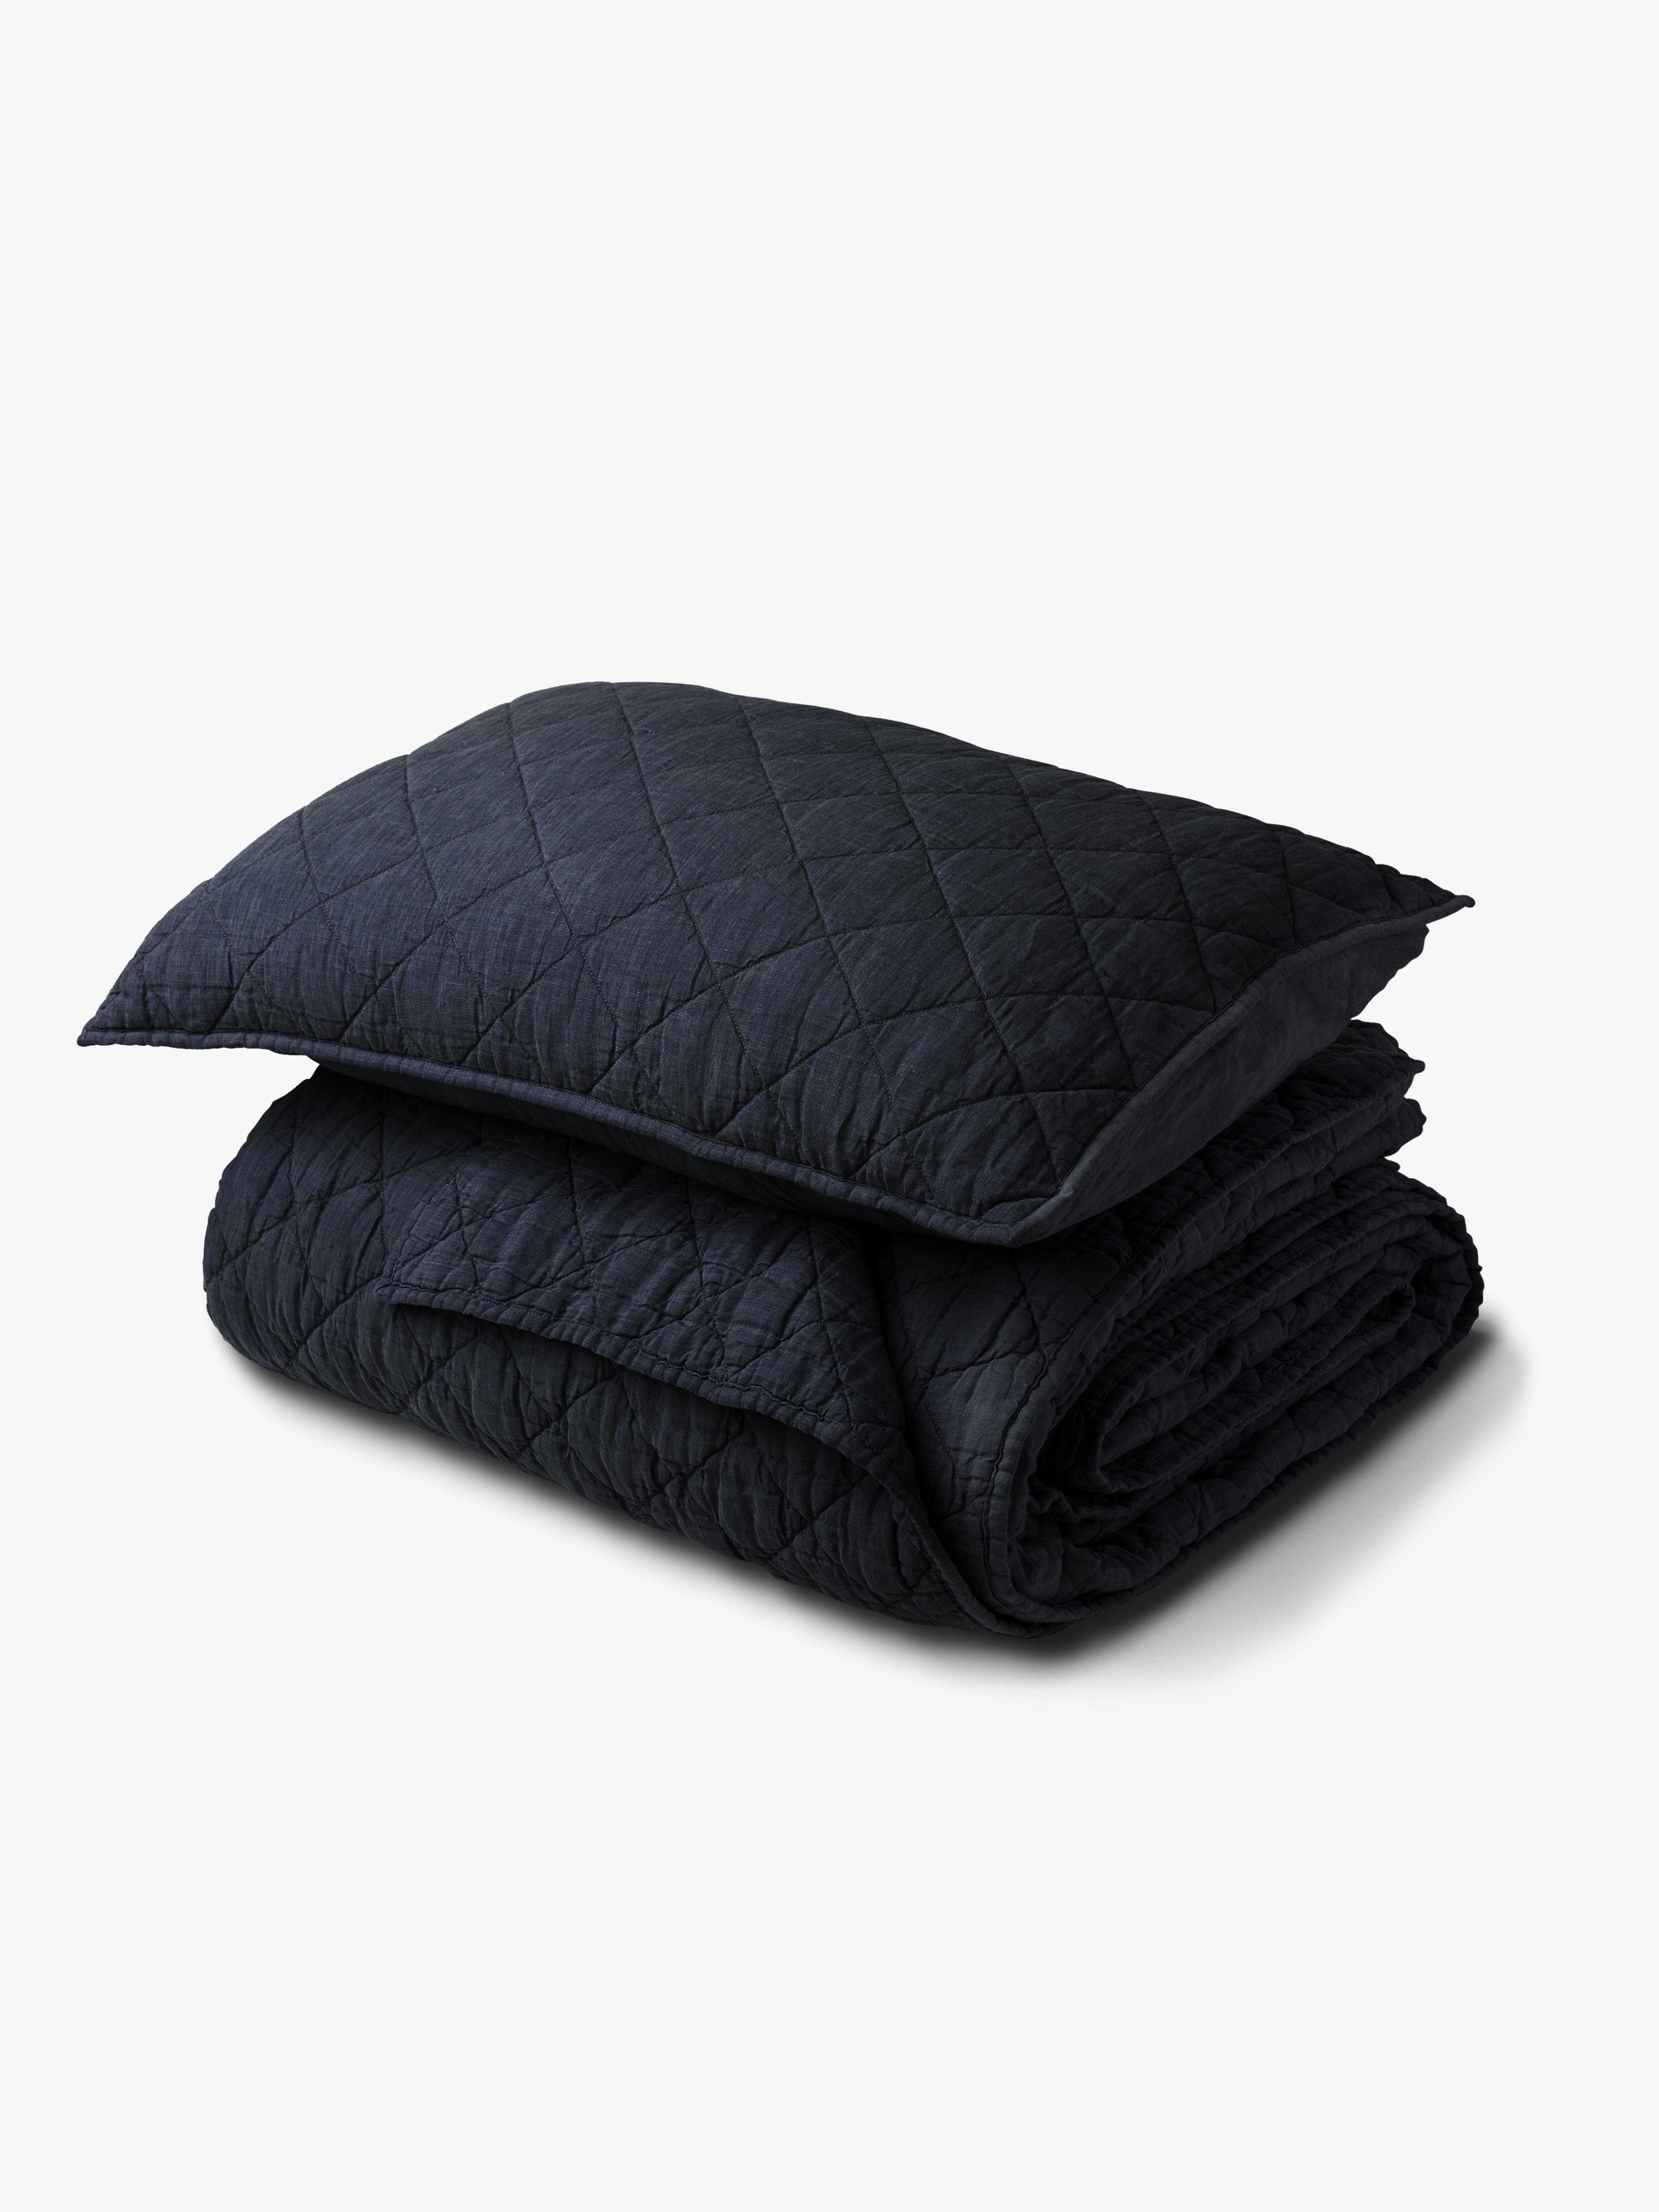 Soho Quilt - Navy Quilt AW18 Single/Double 